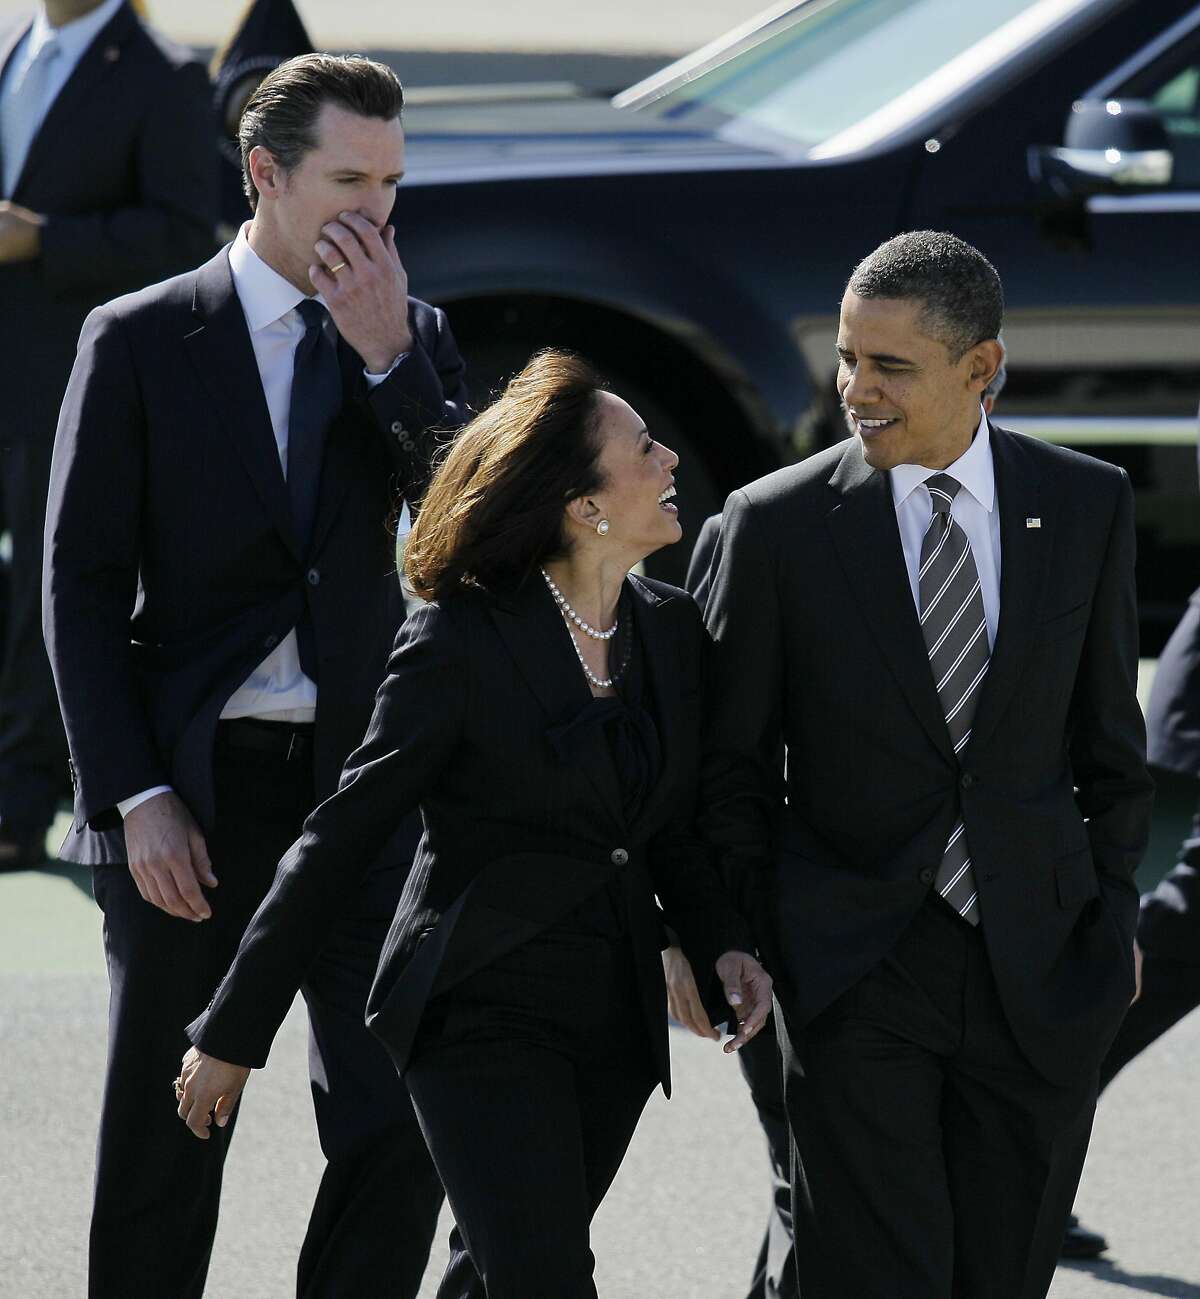 In this Feb. 16, 2012 file photo President Barack Obama walks with California Attorney General Kamala Harris, center, and California Lt. Gov. Gavin Newsom, after arriving at San Francisco International Airport in San Francisco. Obama praised California's attorney general for more than her smarts and toughness at a Democratic Party event Thursday, April 4, 2013. The president also commended Harris for being "the best-looking attorney general" during a Democratic fundraising lunch in the Silicon Valley. (AP Photo/Eric Risberg, File)